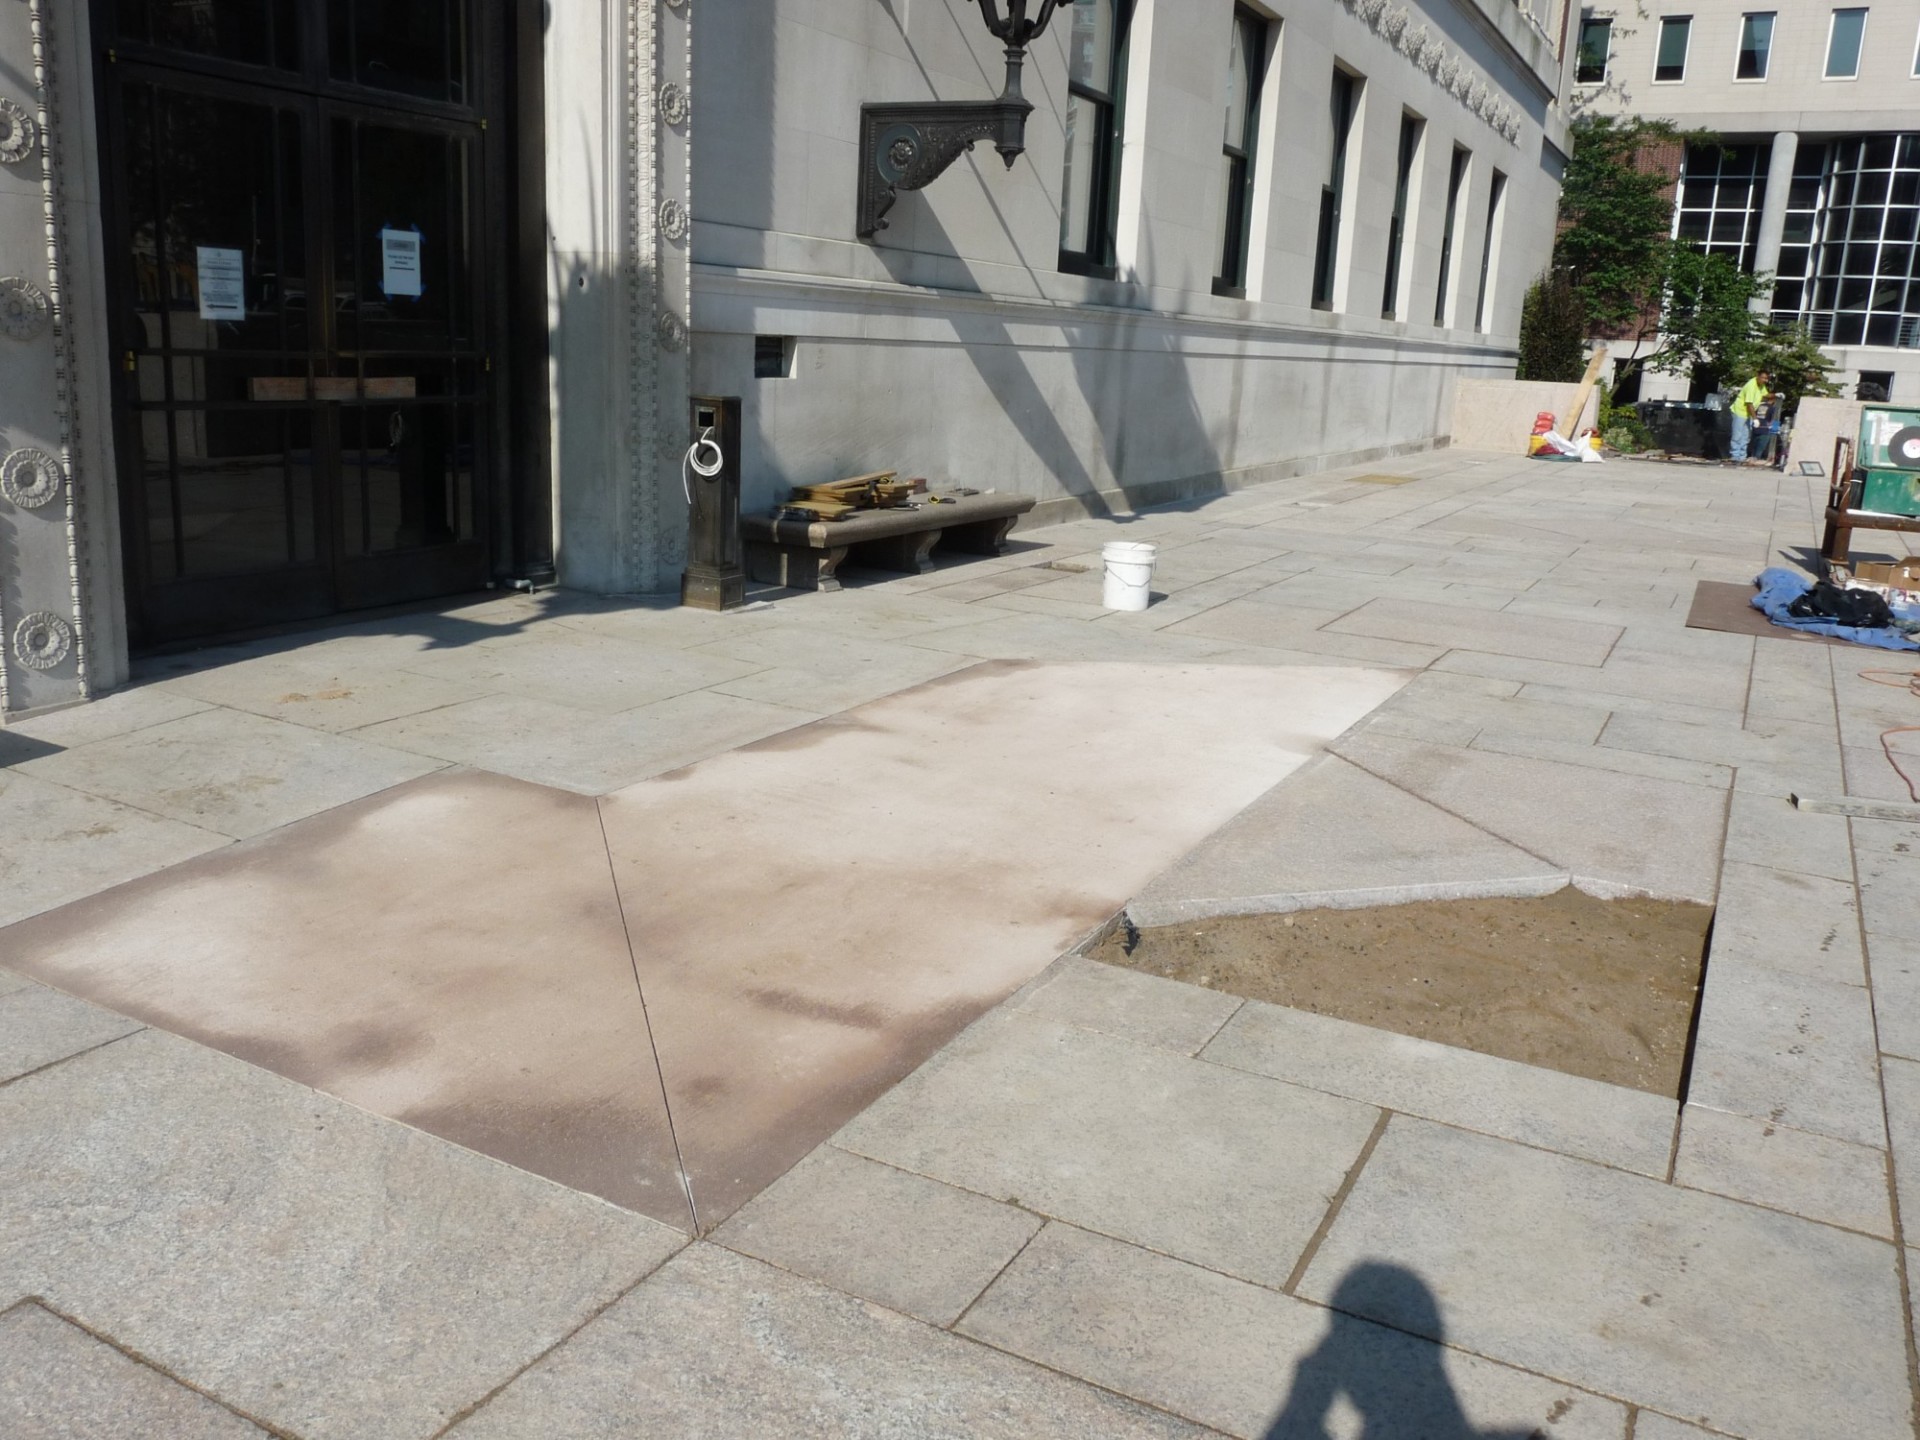 Temporary concrete has been installed in one area of Butler Plaza while we wait for granite pieces to be delivered